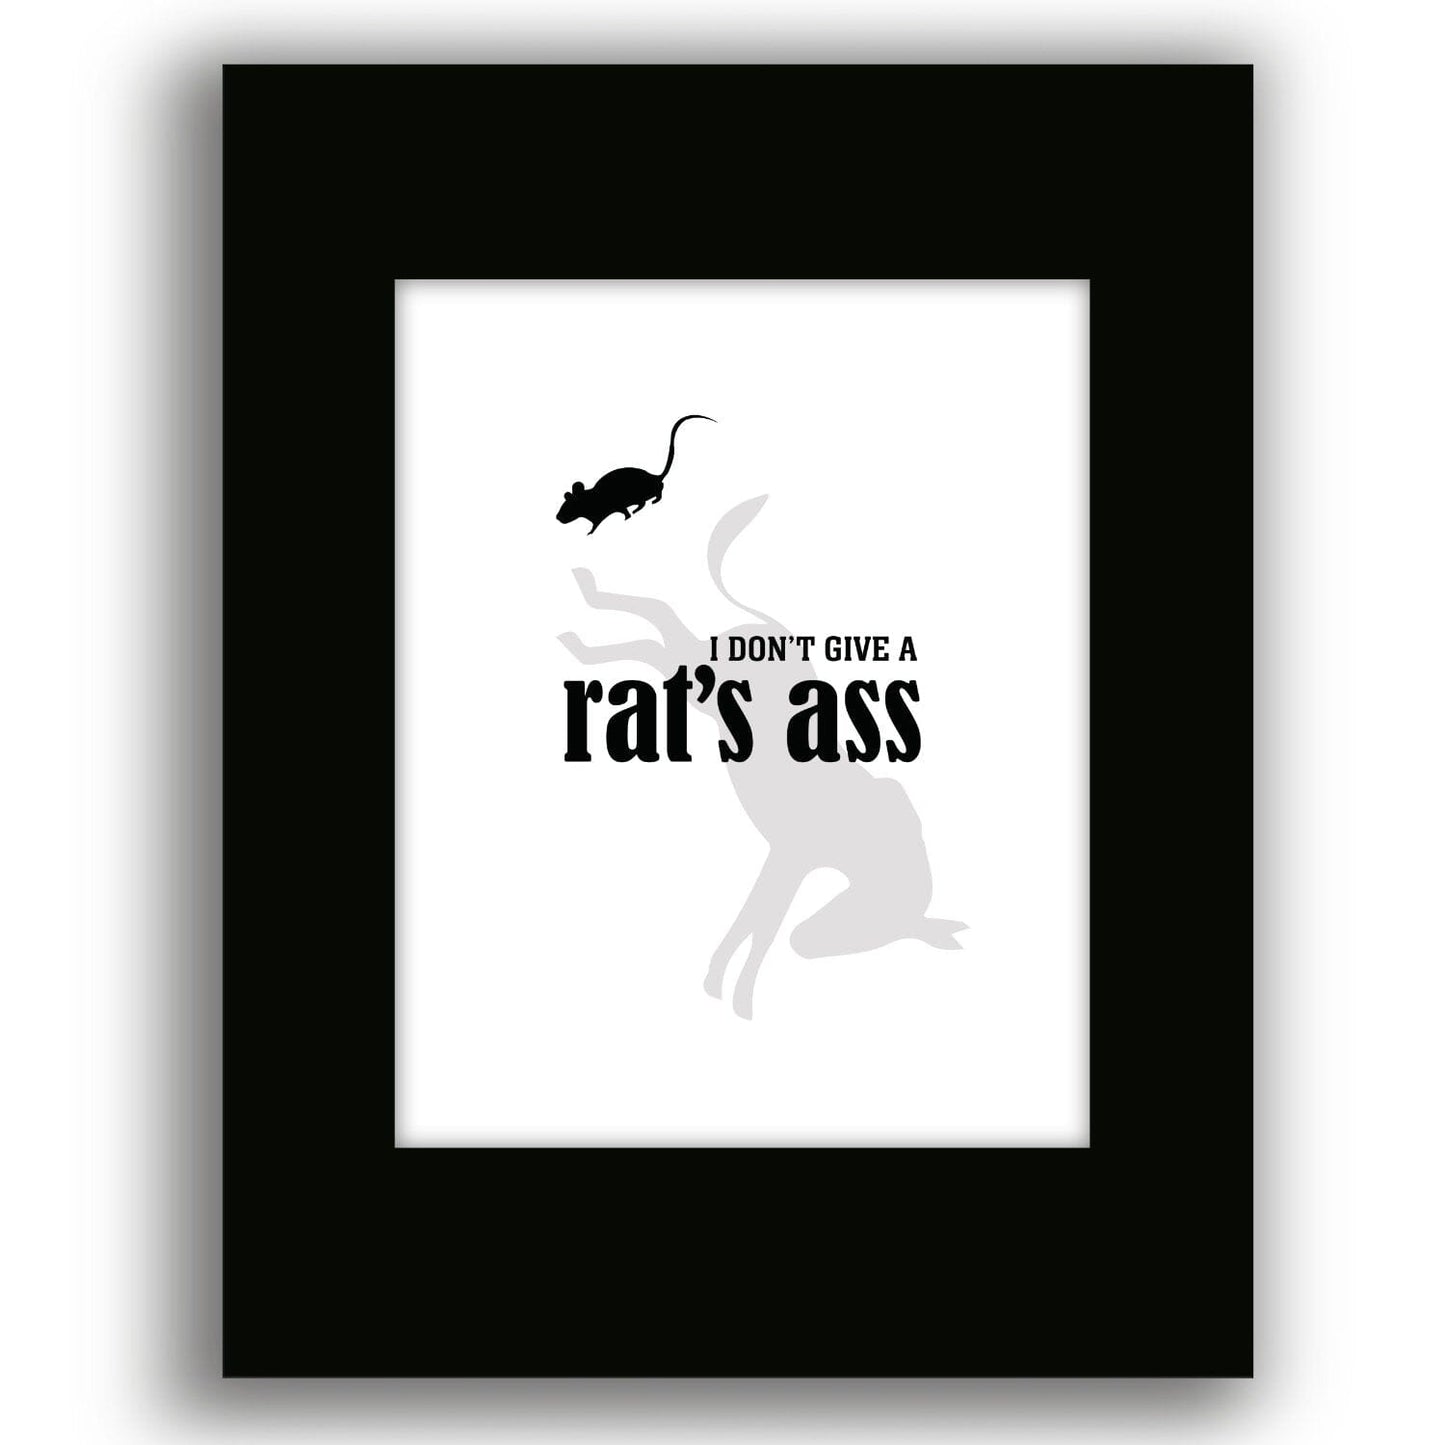 I Don't Give a Rat's Ass - Wise and Witty Sarcastic Print Wise and Wiseass Quotes Song Lyrics Art 